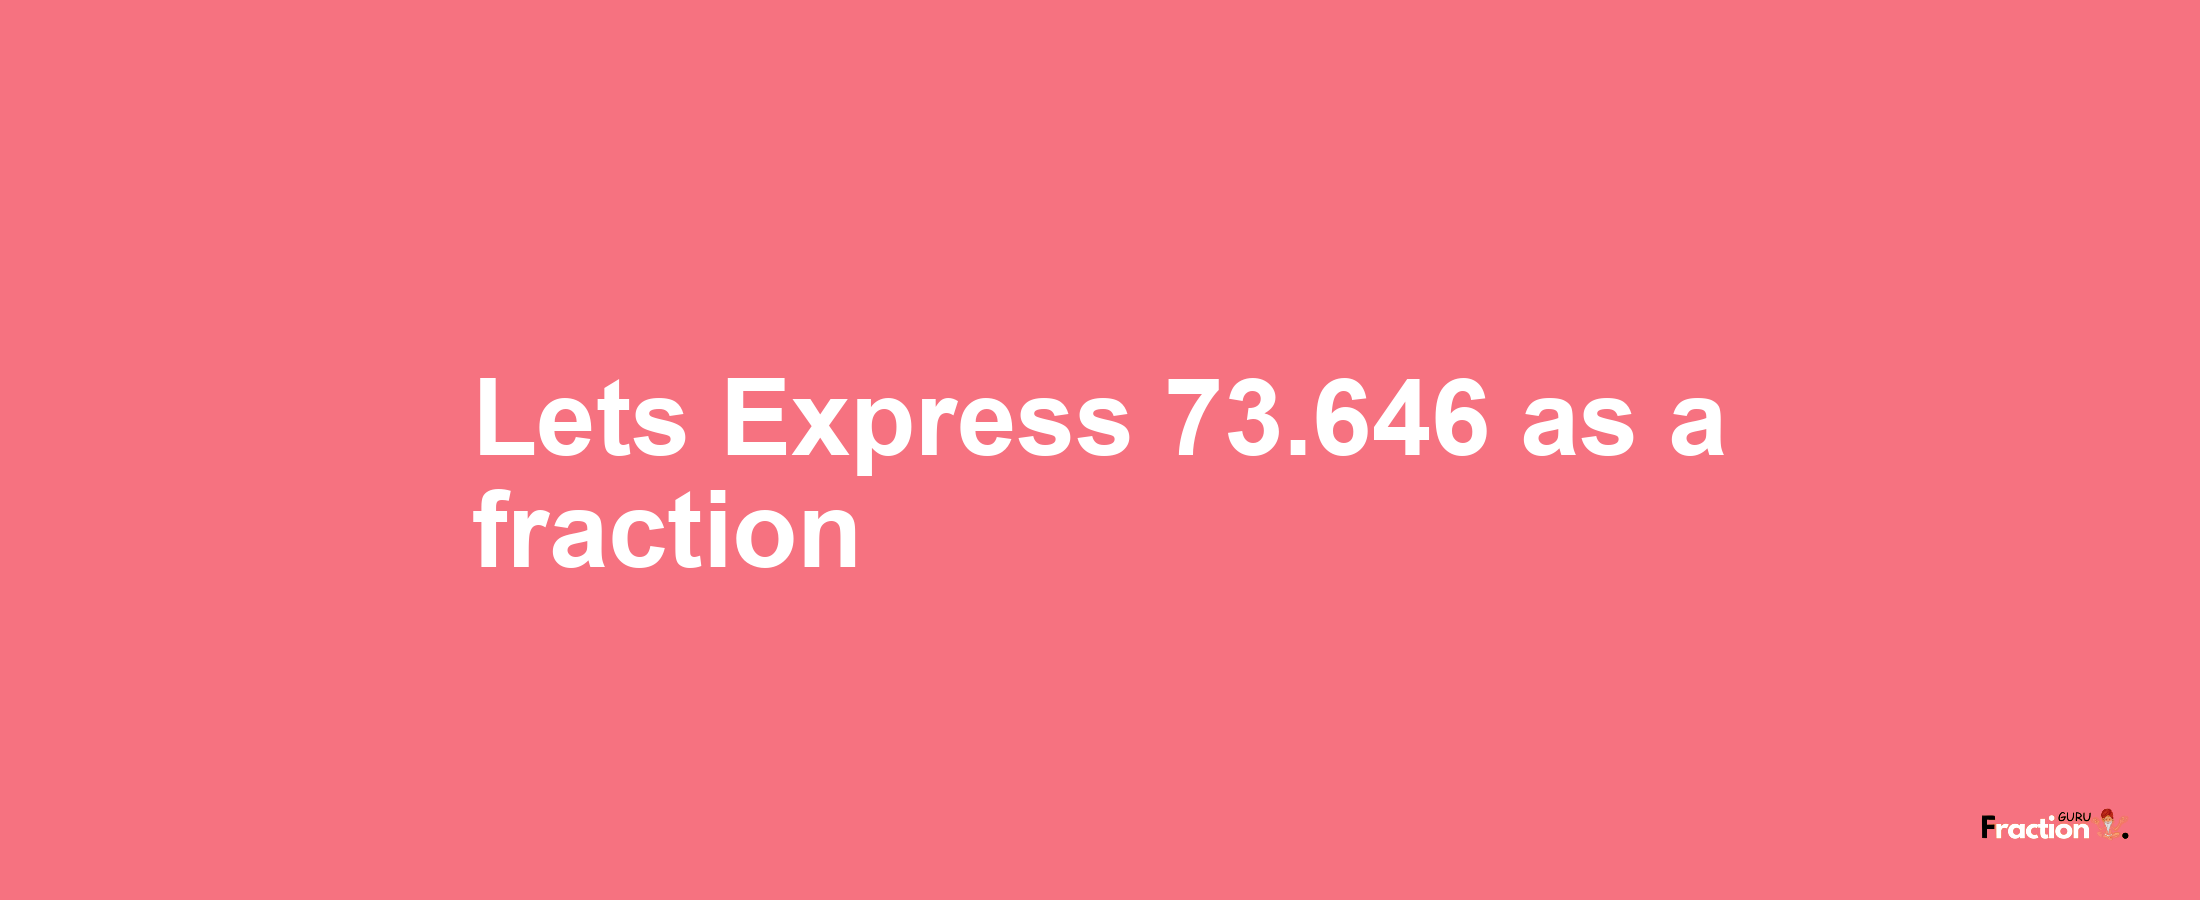 Lets Express 73.646 as afraction